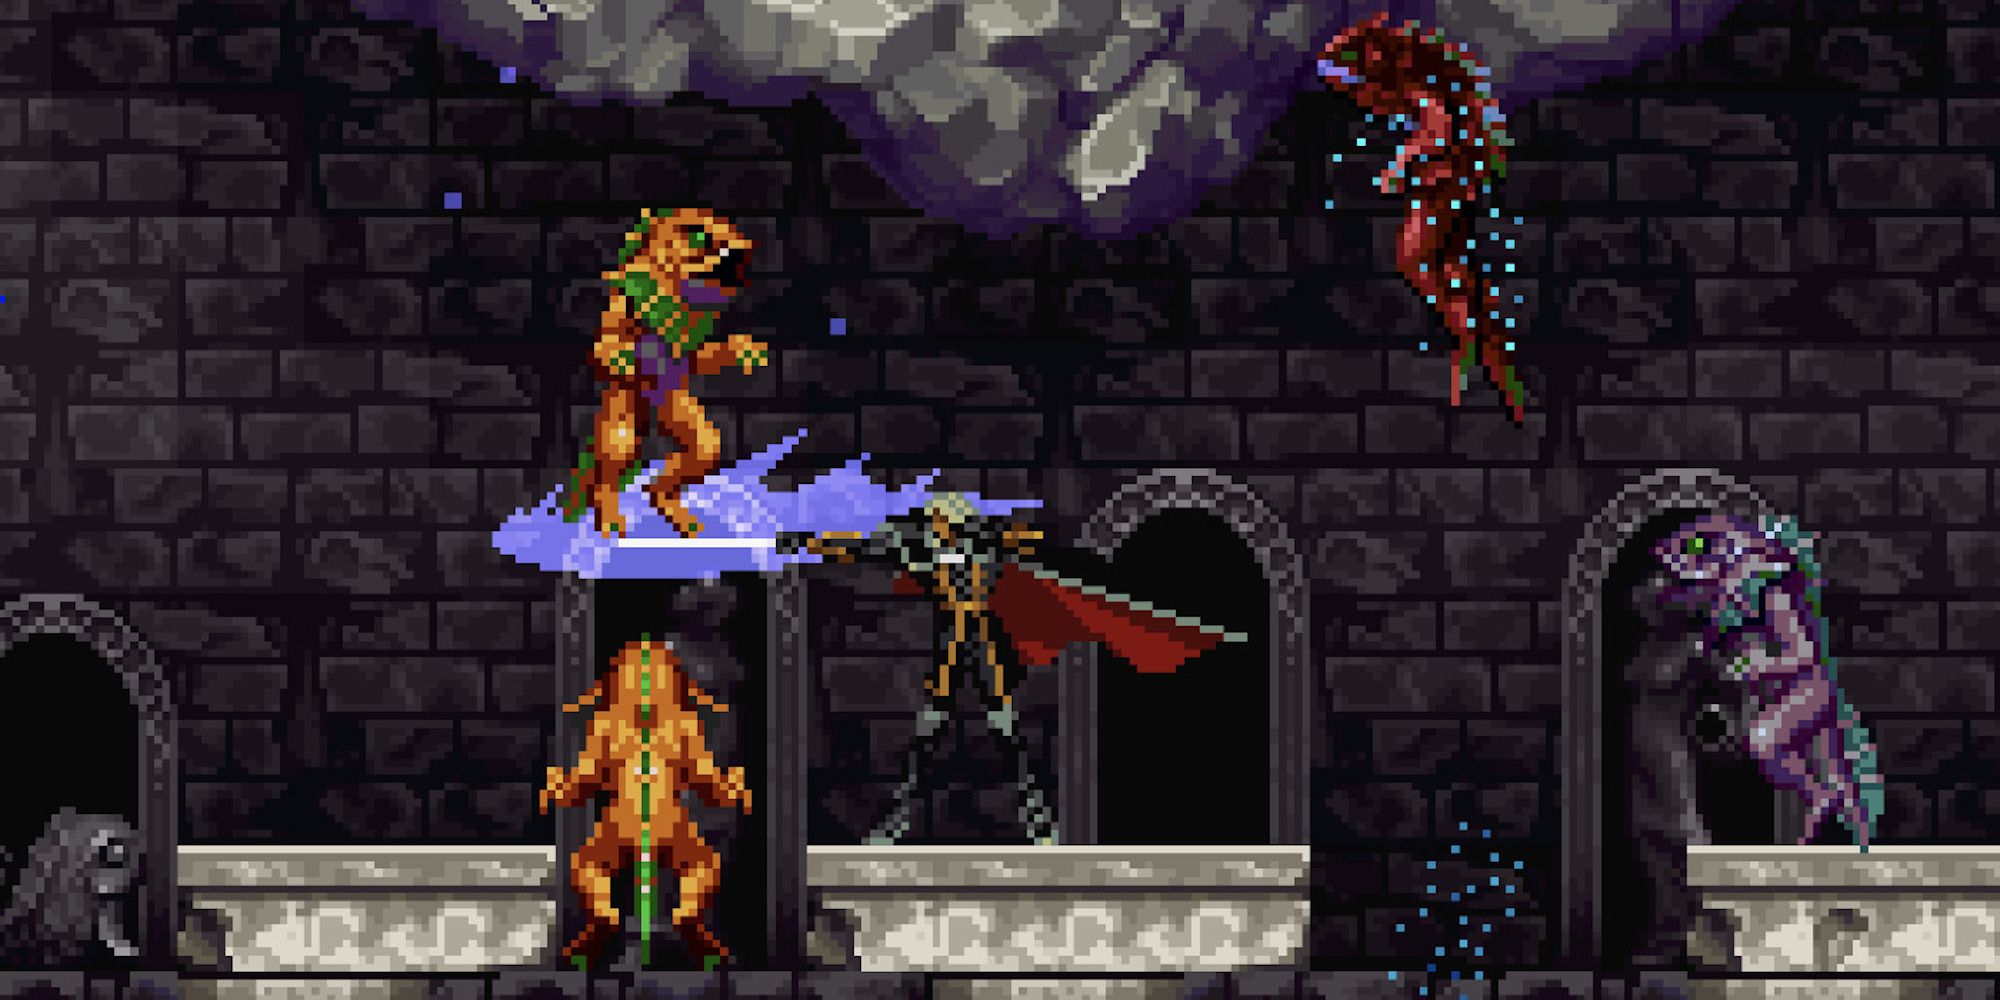 Fighting enemies in Castlevania Symphony of the Night